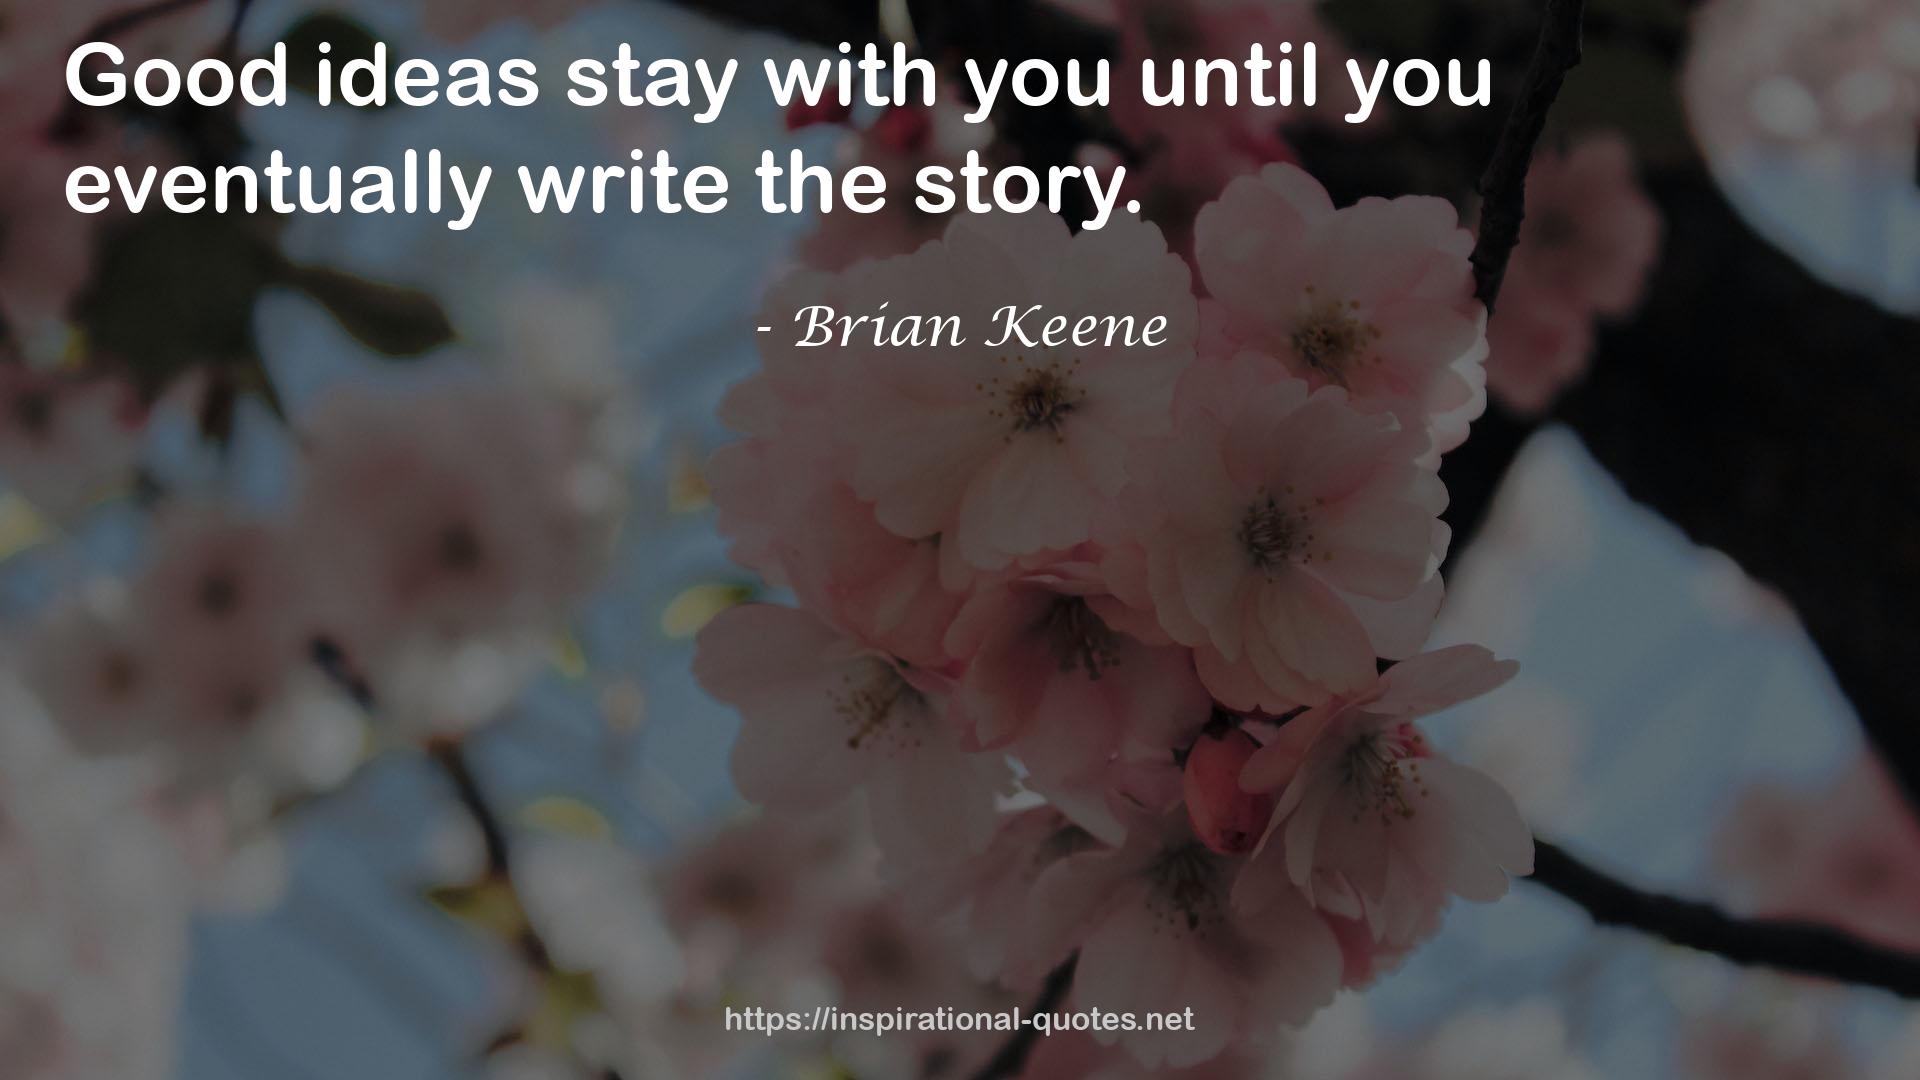 Brian Keene QUOTES